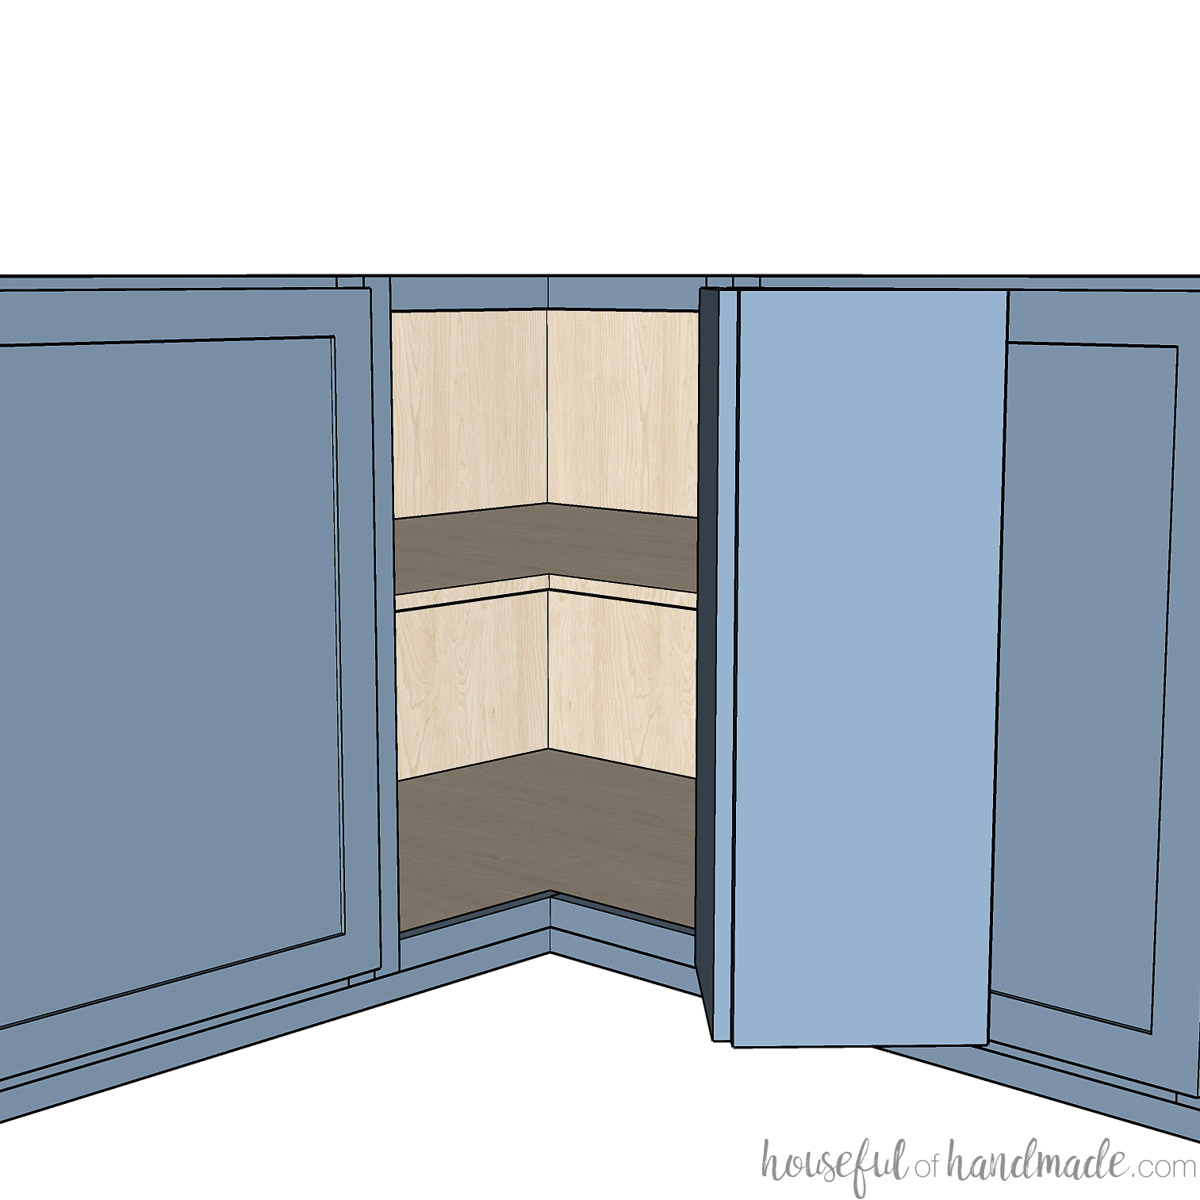 3D sketch of a corner cabinet with a bi-fold door open showing the inside.